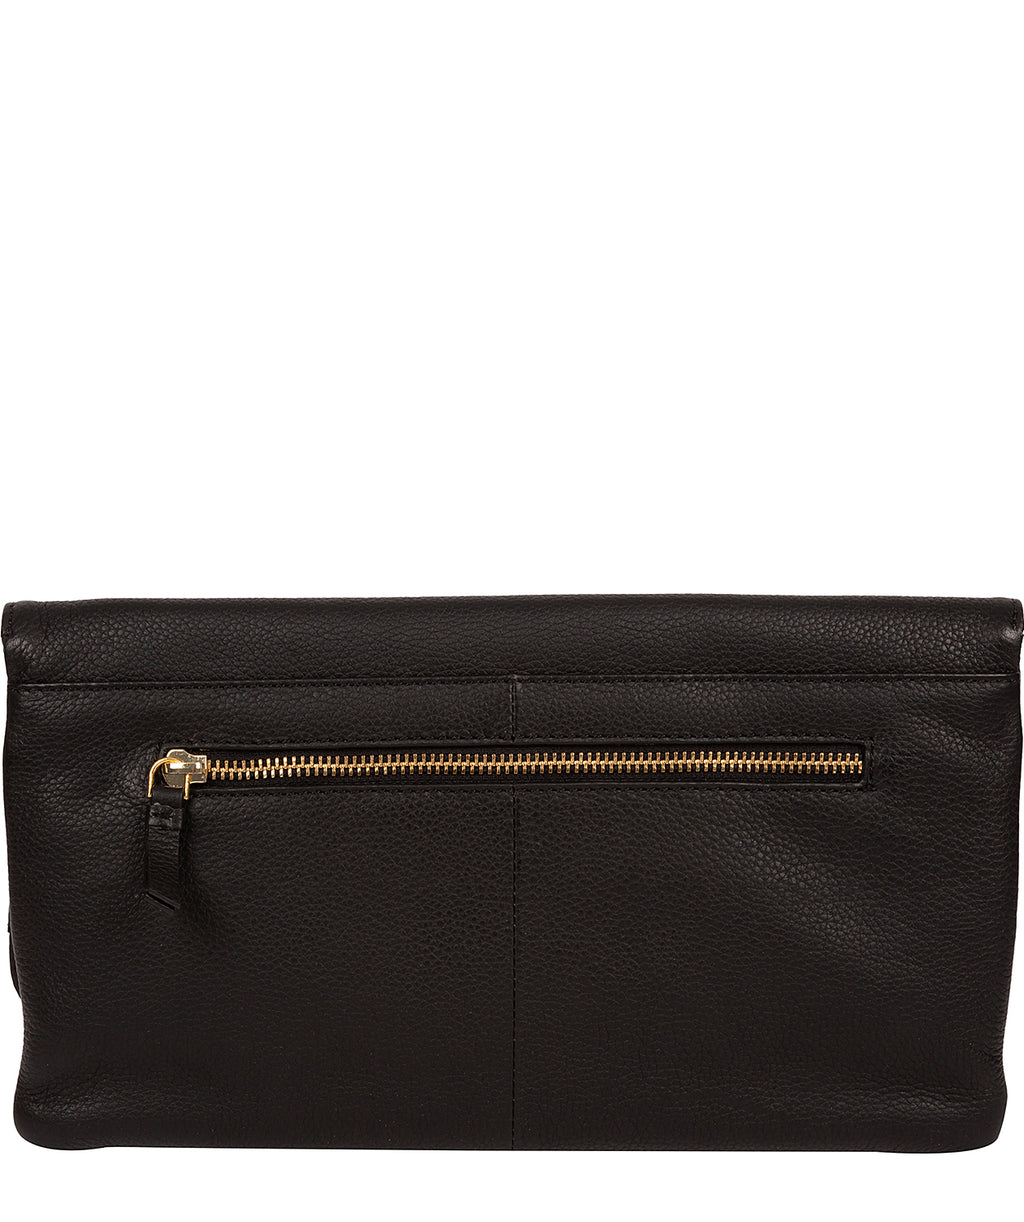 Black Leather Clutch Bag 'Golders' by Pure Luxuries – Pure Luxuries London